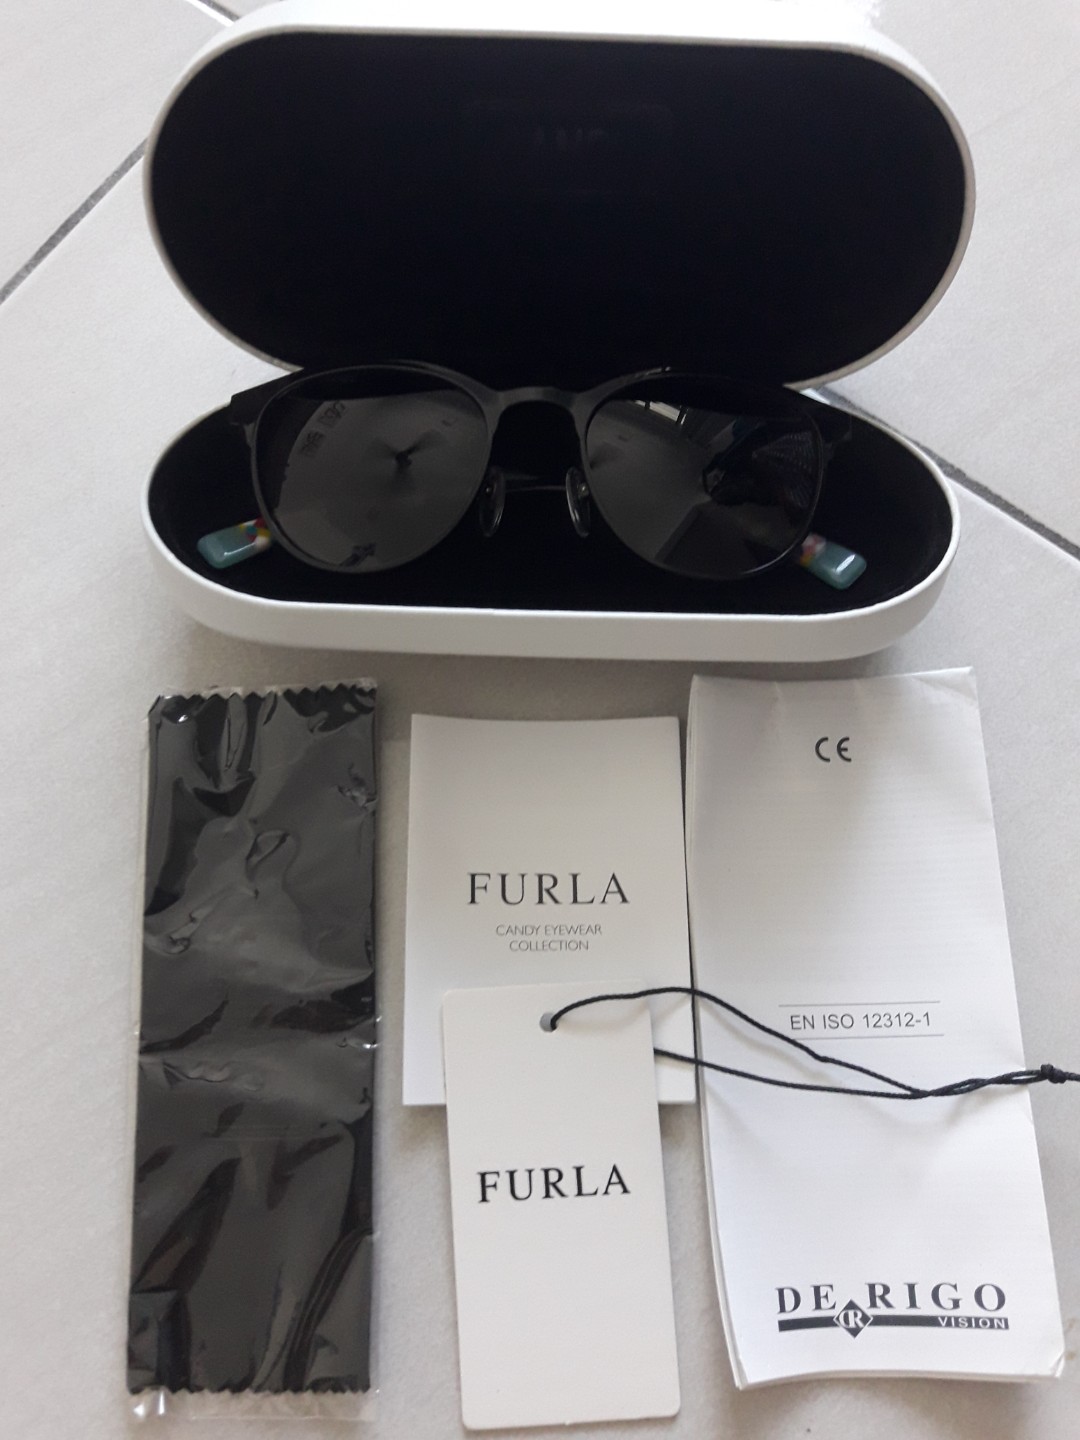 FURLA CANDY SUNGLASSES WITH FREE GIFT!!!